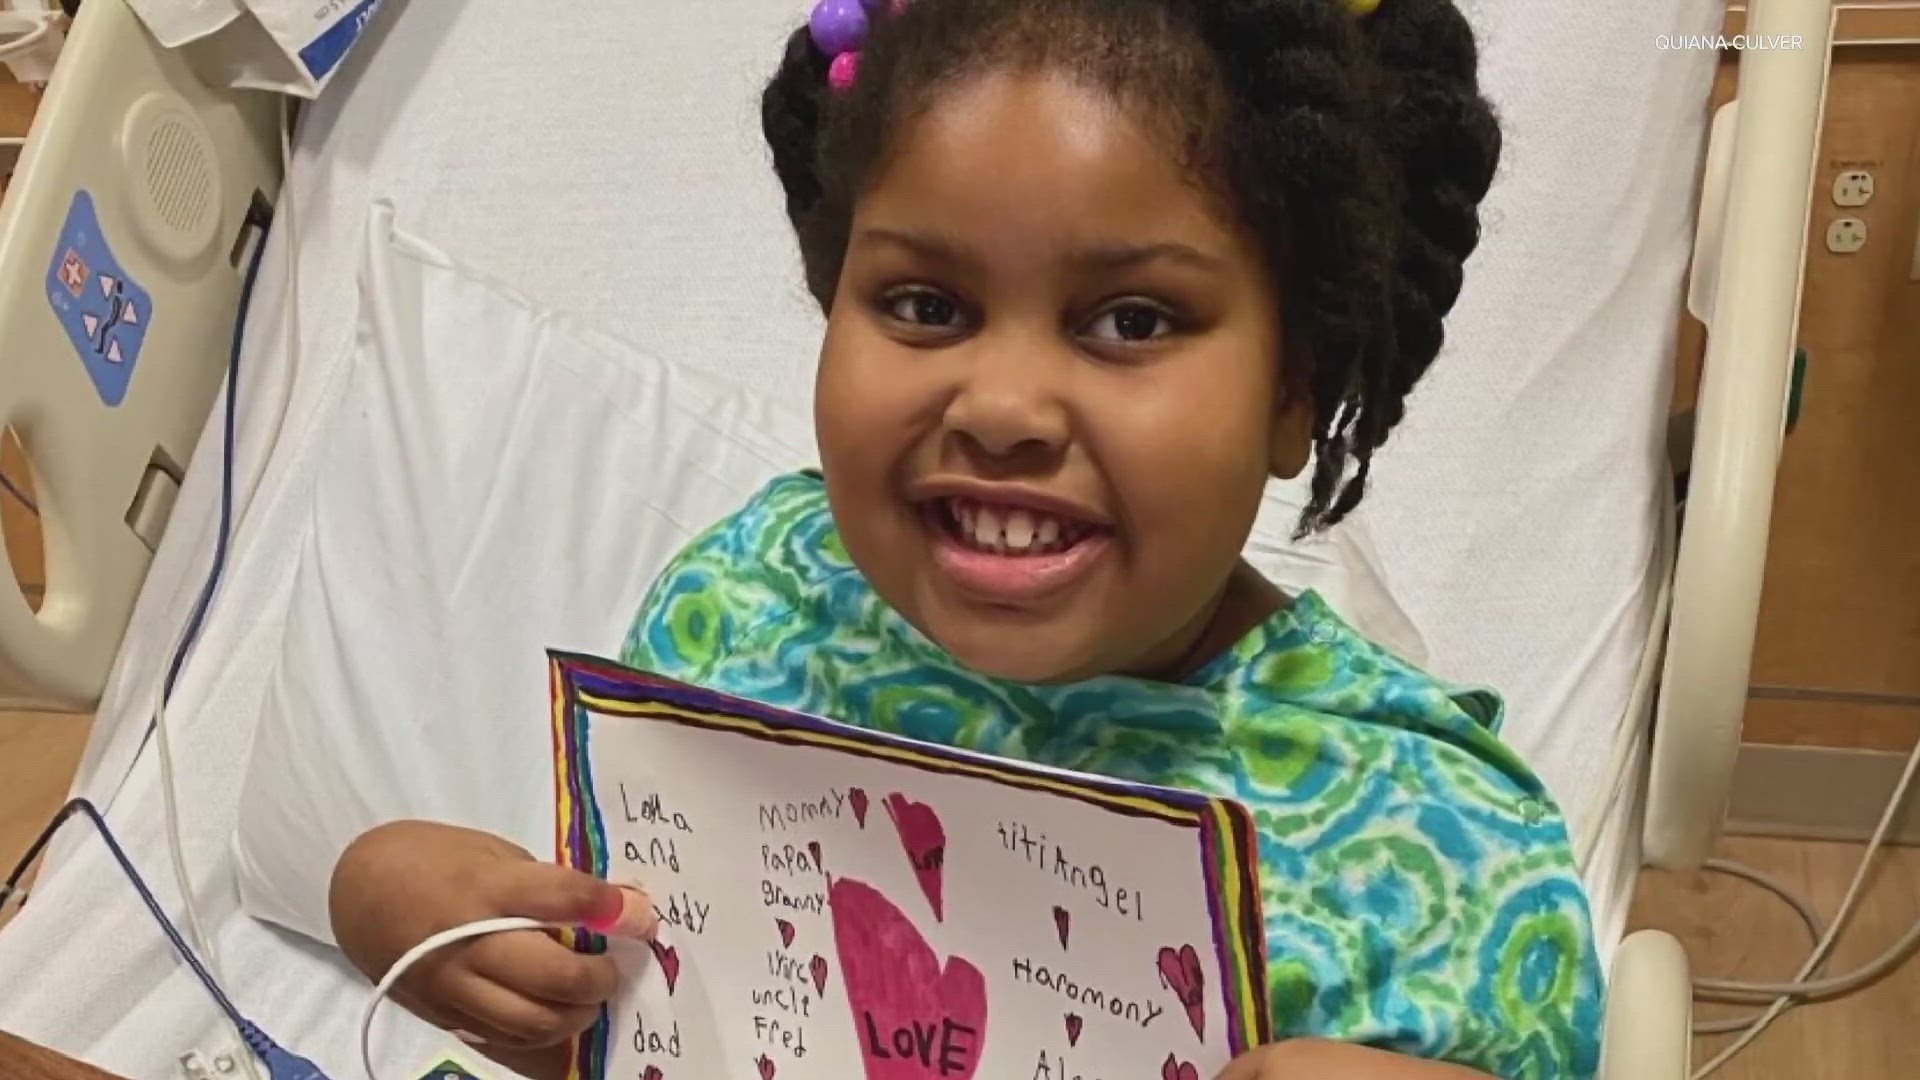 Every parent wants their child to be healthy and happy. That dream is still a possibility for 10-year old Serenity and her family.